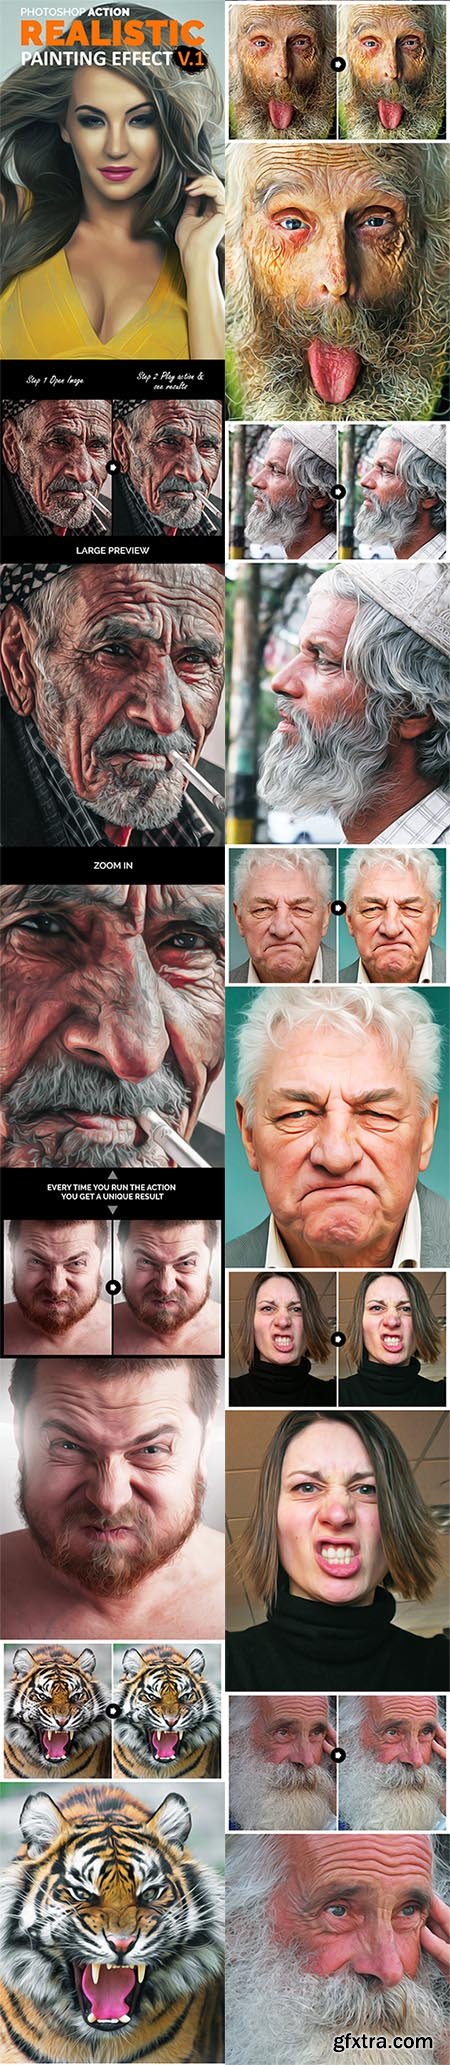 GraphicRiver - Realistic Painting Effect V1 - Photoshop Action 10150335